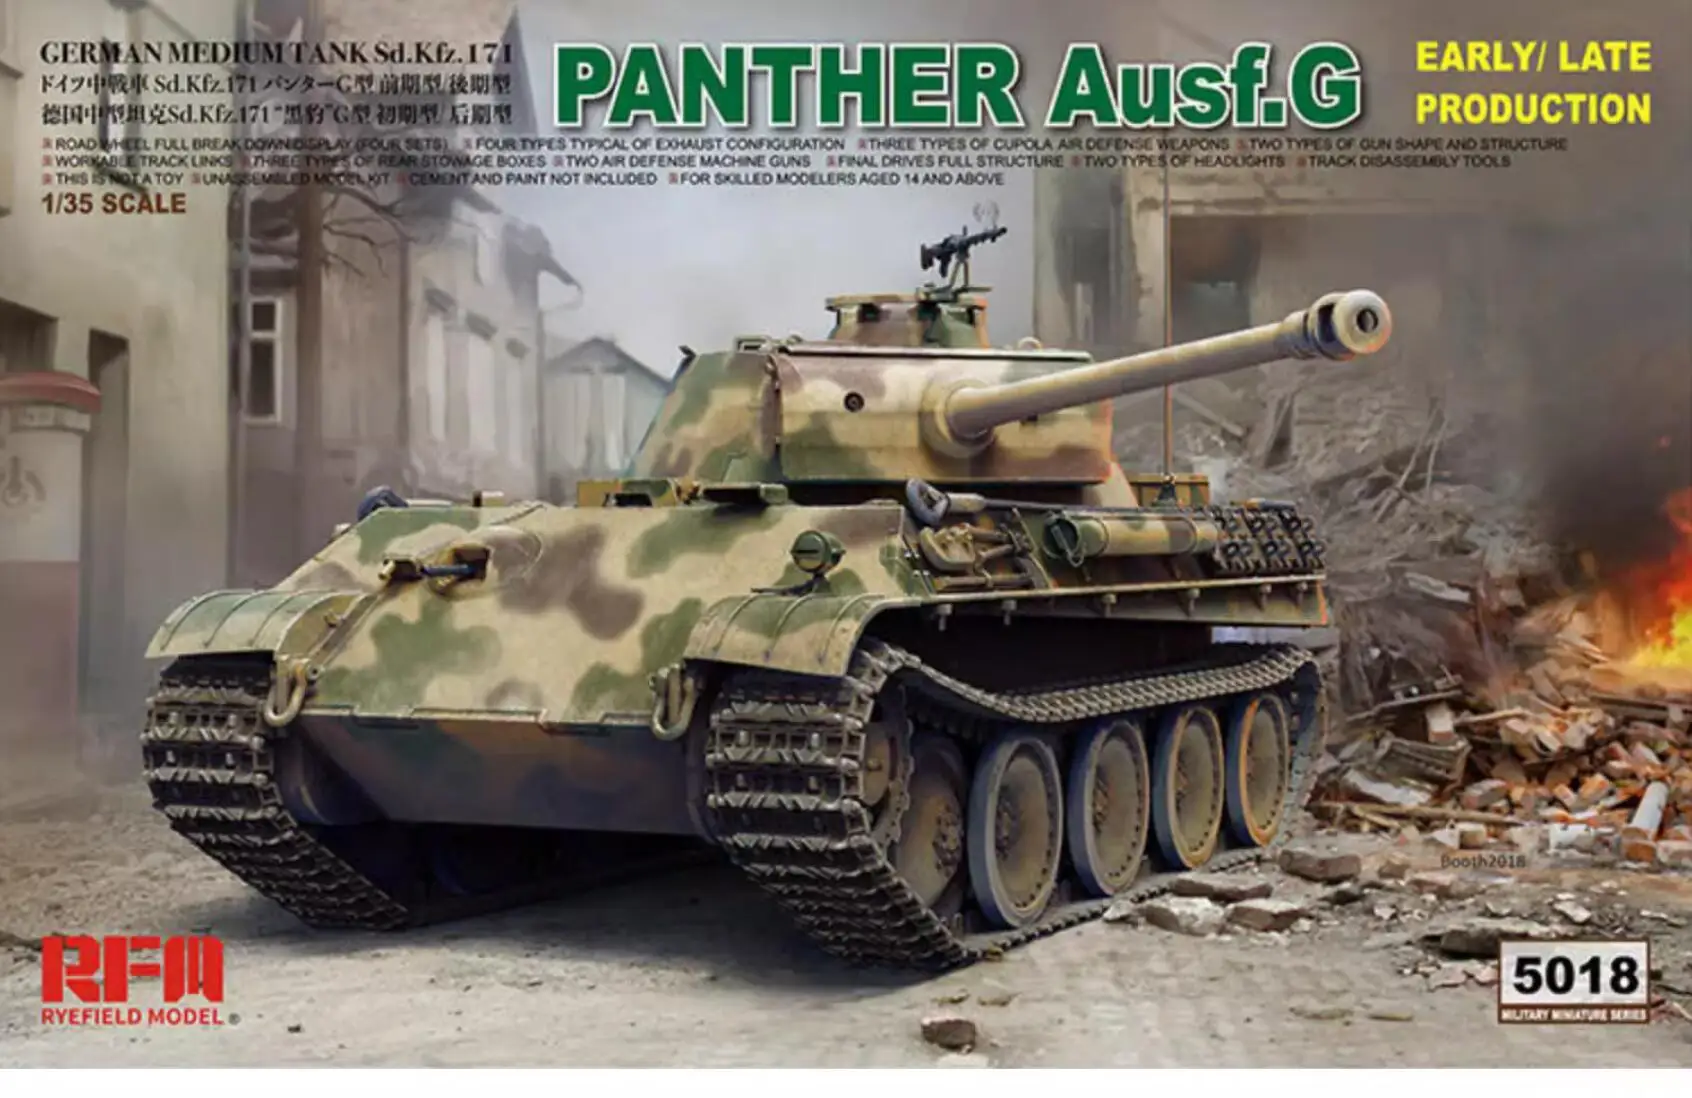 

Rye Field Model RFM RM-5018 1/35 German Panther Ausf.G Early/Late Production - Scale model Kit